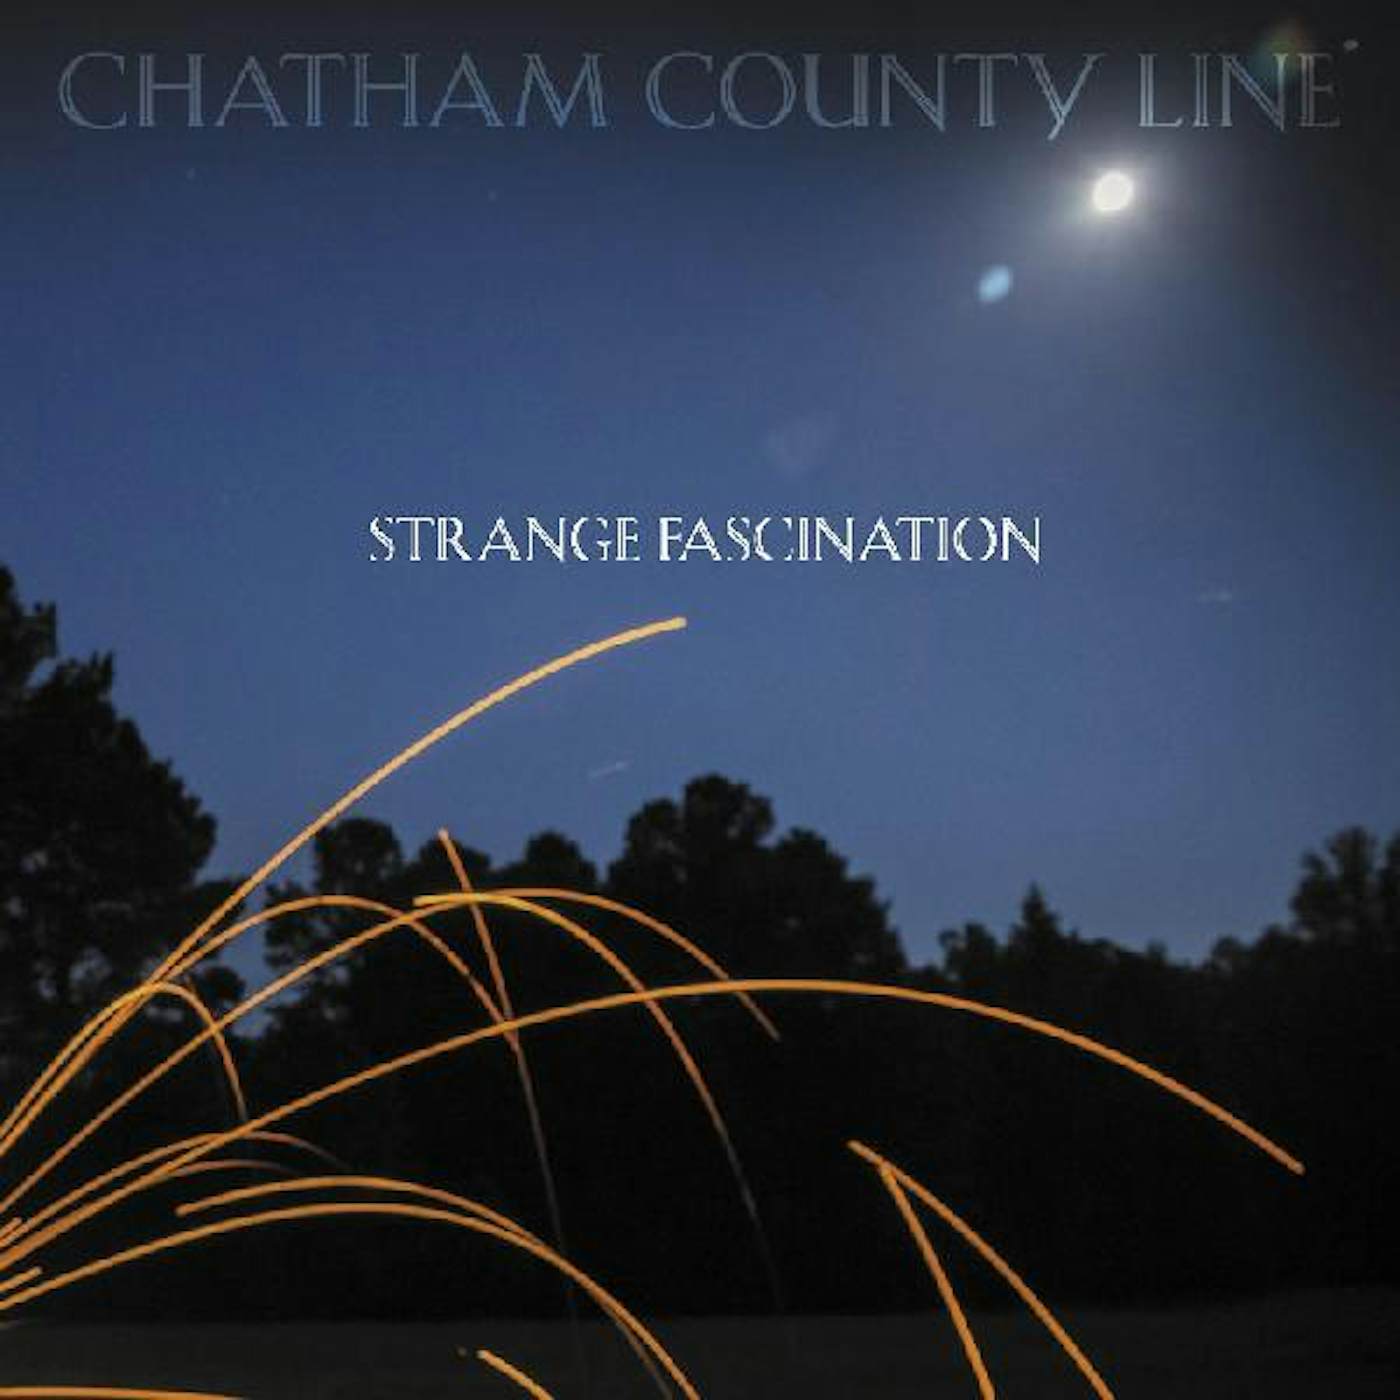 Chatham County Line STRANGE FASCINATION (FIRST EDITION) (DL CARD) Vinyl Record